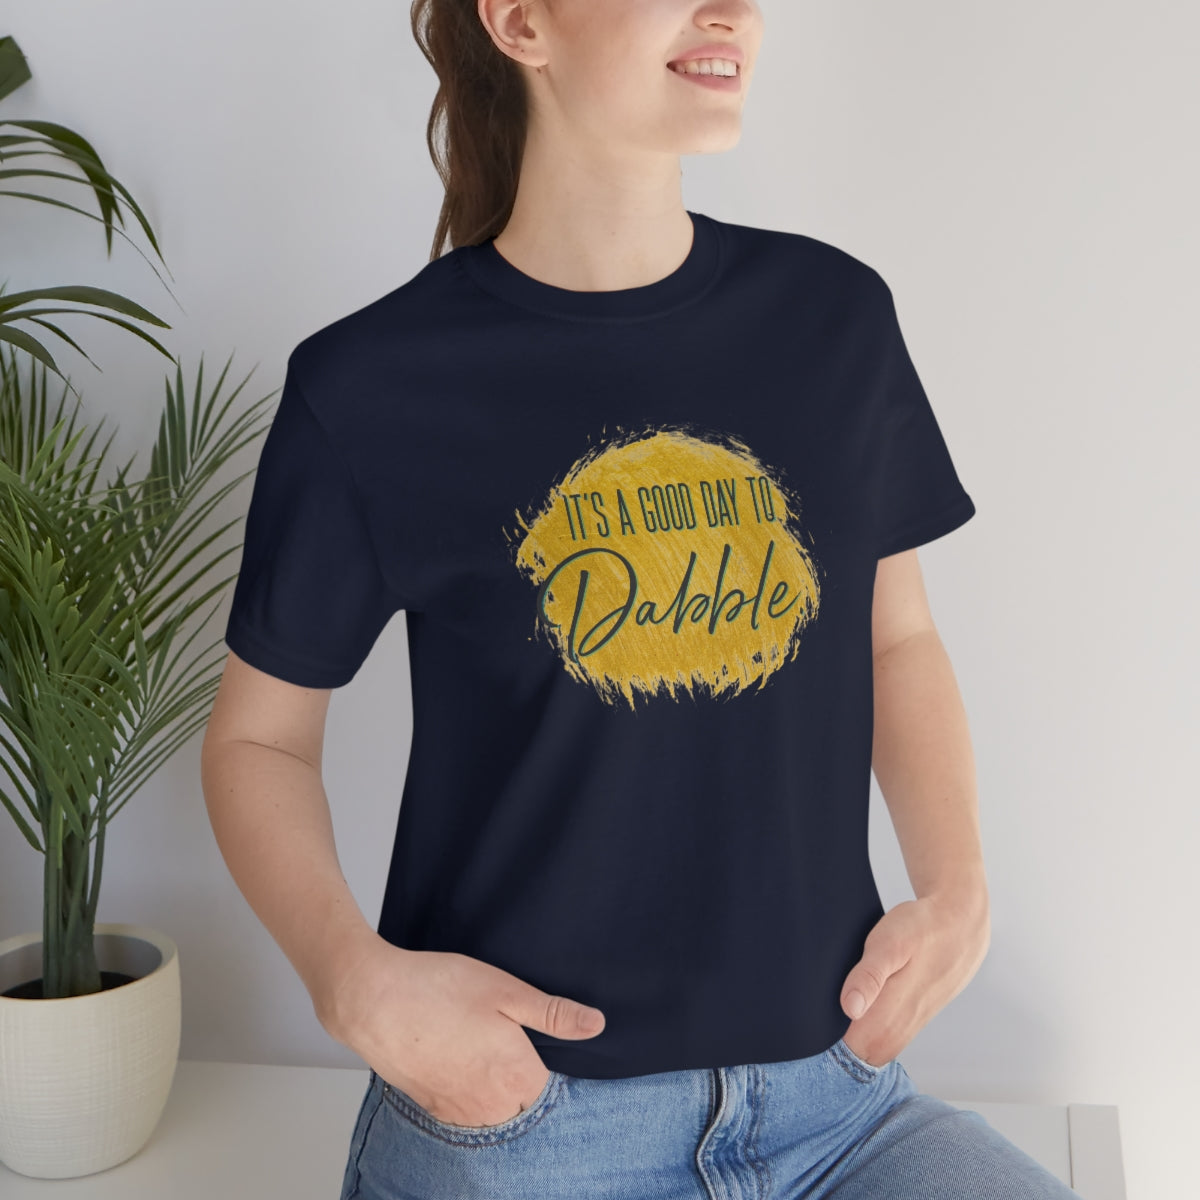 It's a good day to Dabble Short Sleeve Tee